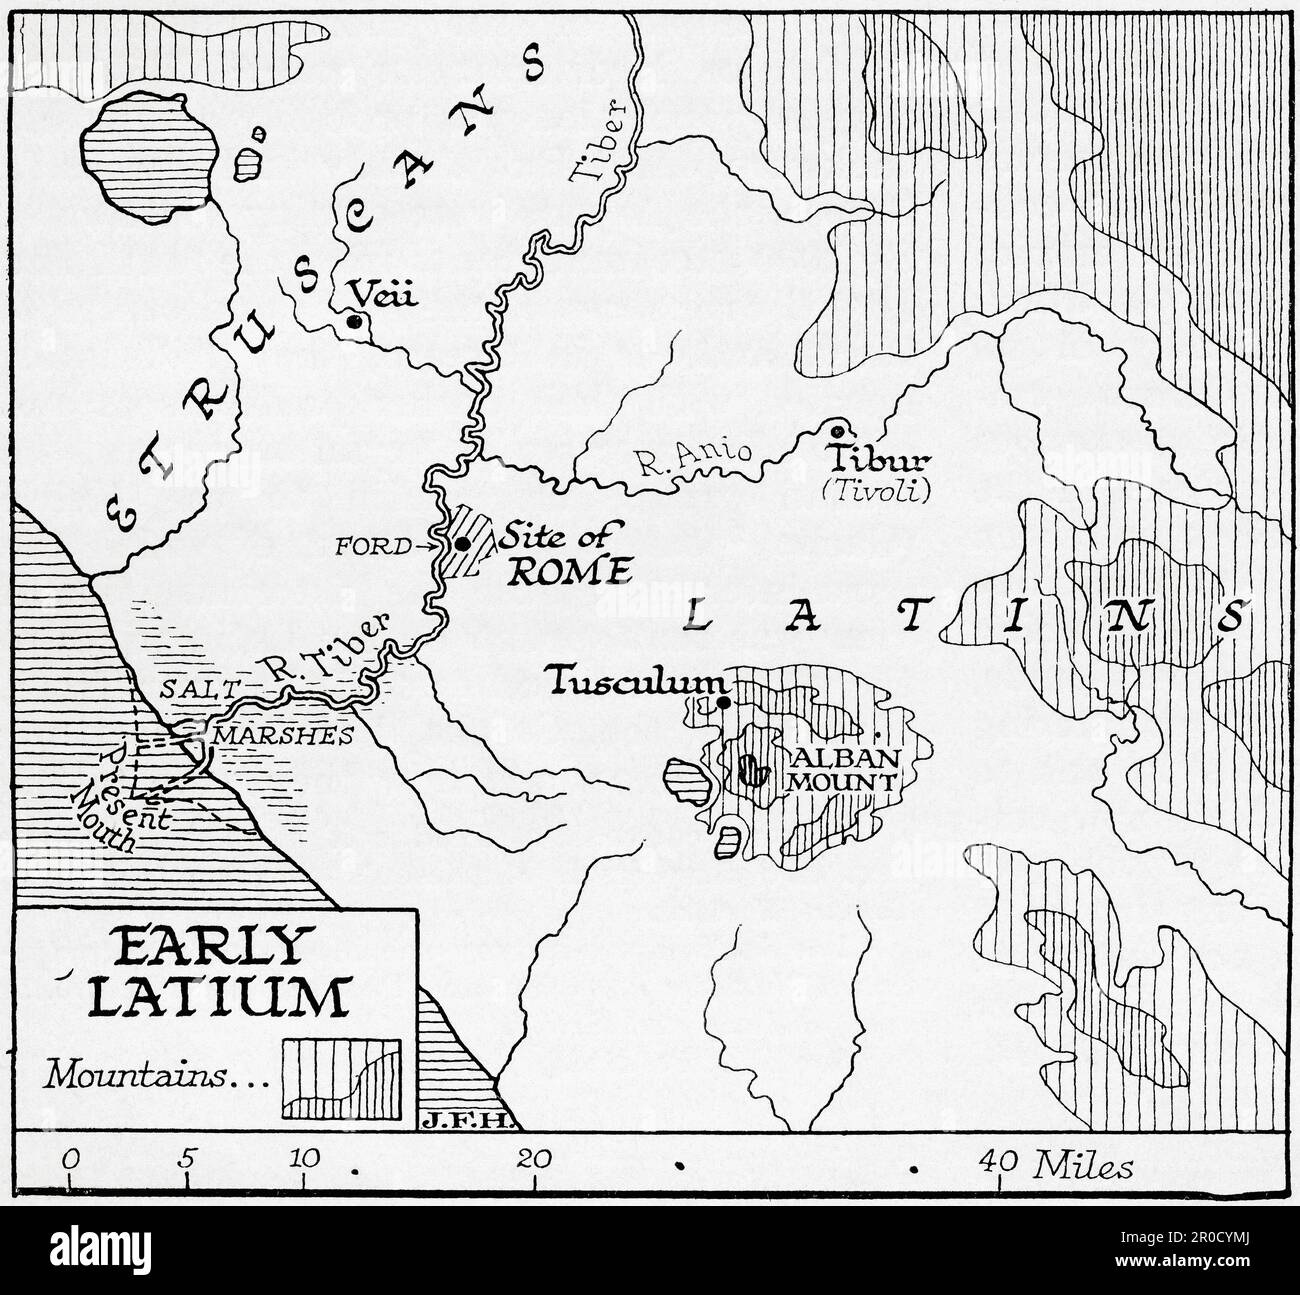 Map showing early Latium, the region of central western Italy in which the city of Rome was founded.  From the book Outline of History by H.G. Wells, published 1920. Stock Photo